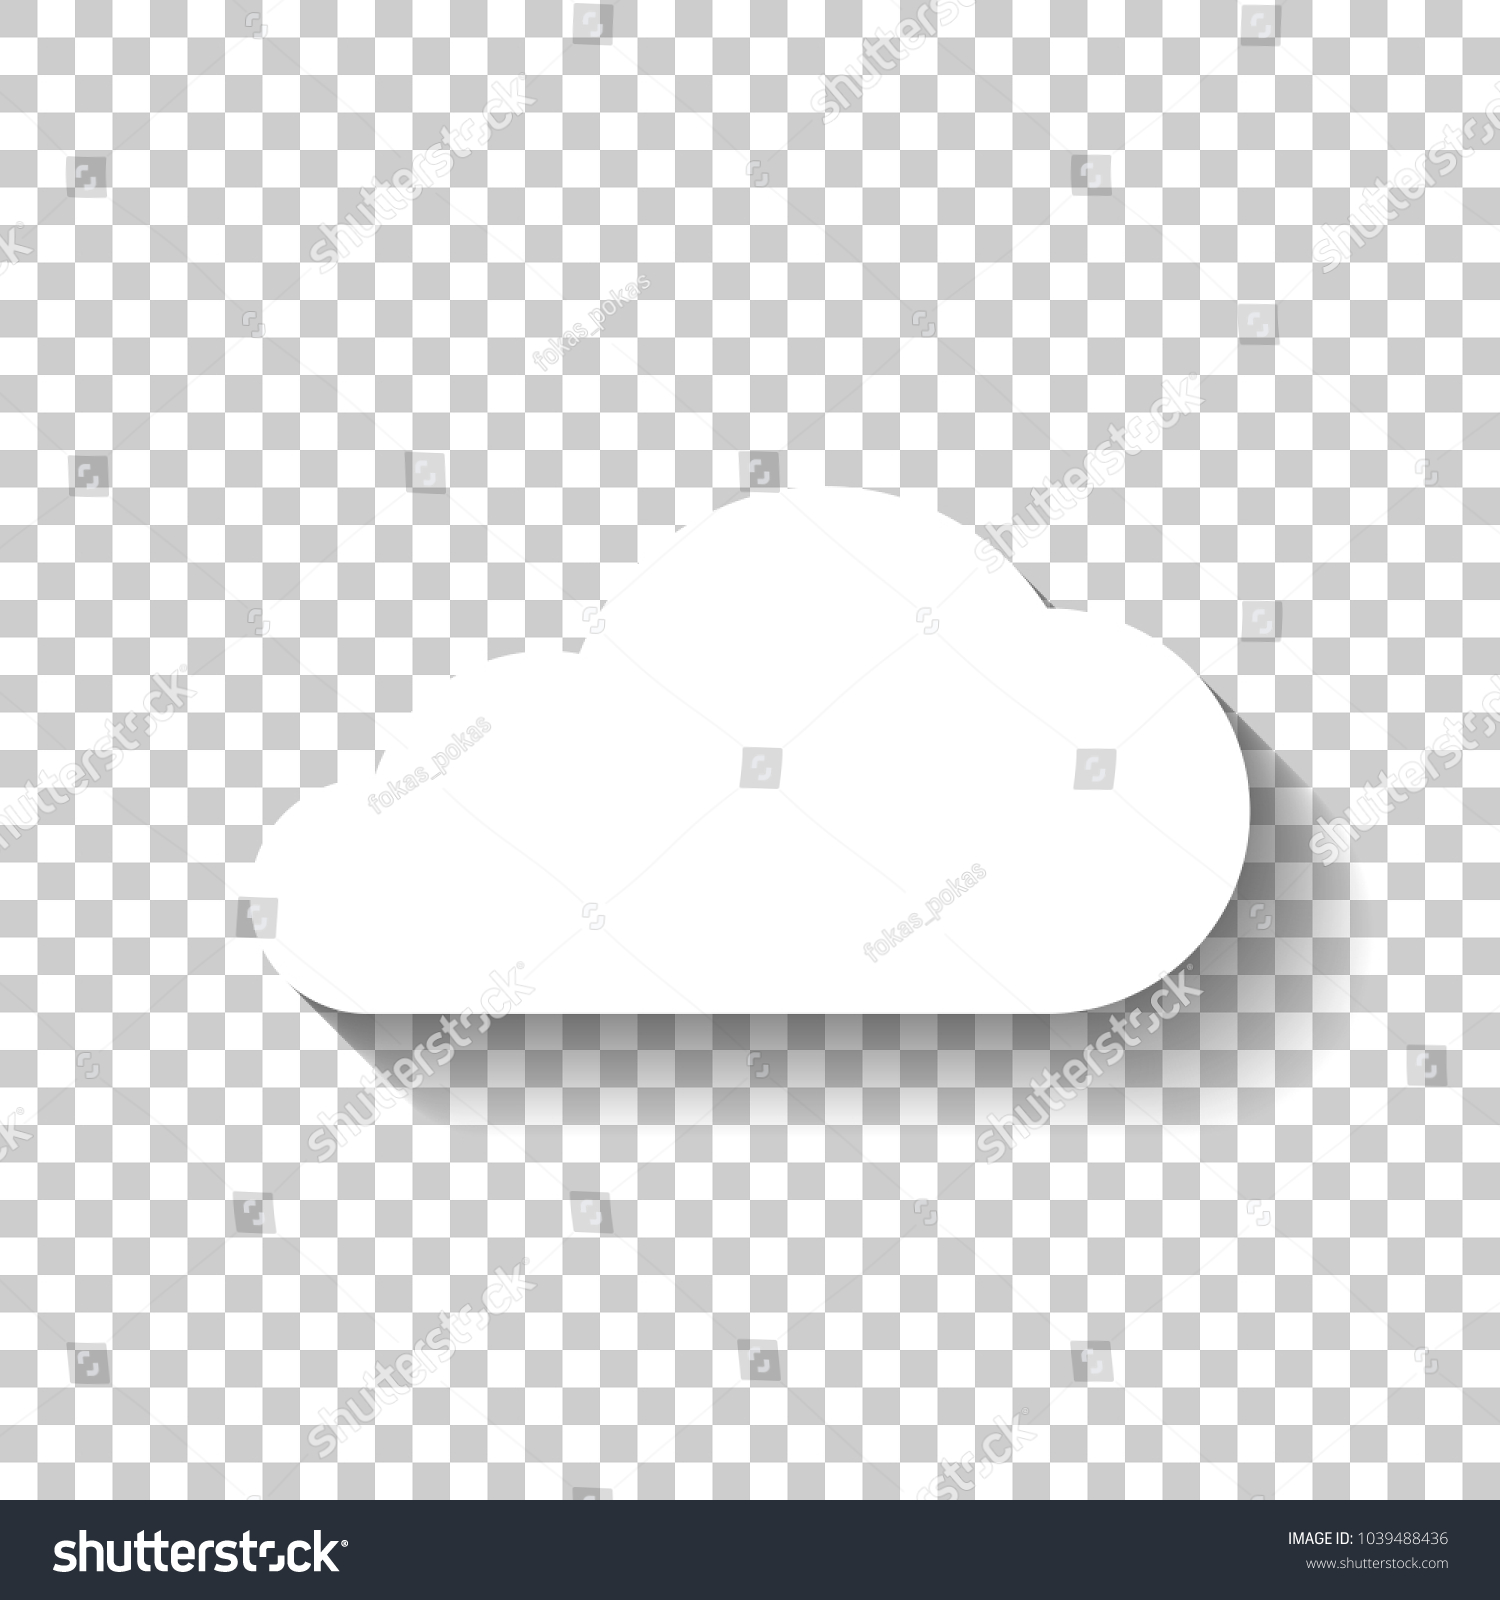 cloud icon. White icon with shadow on transparent background #1039488436